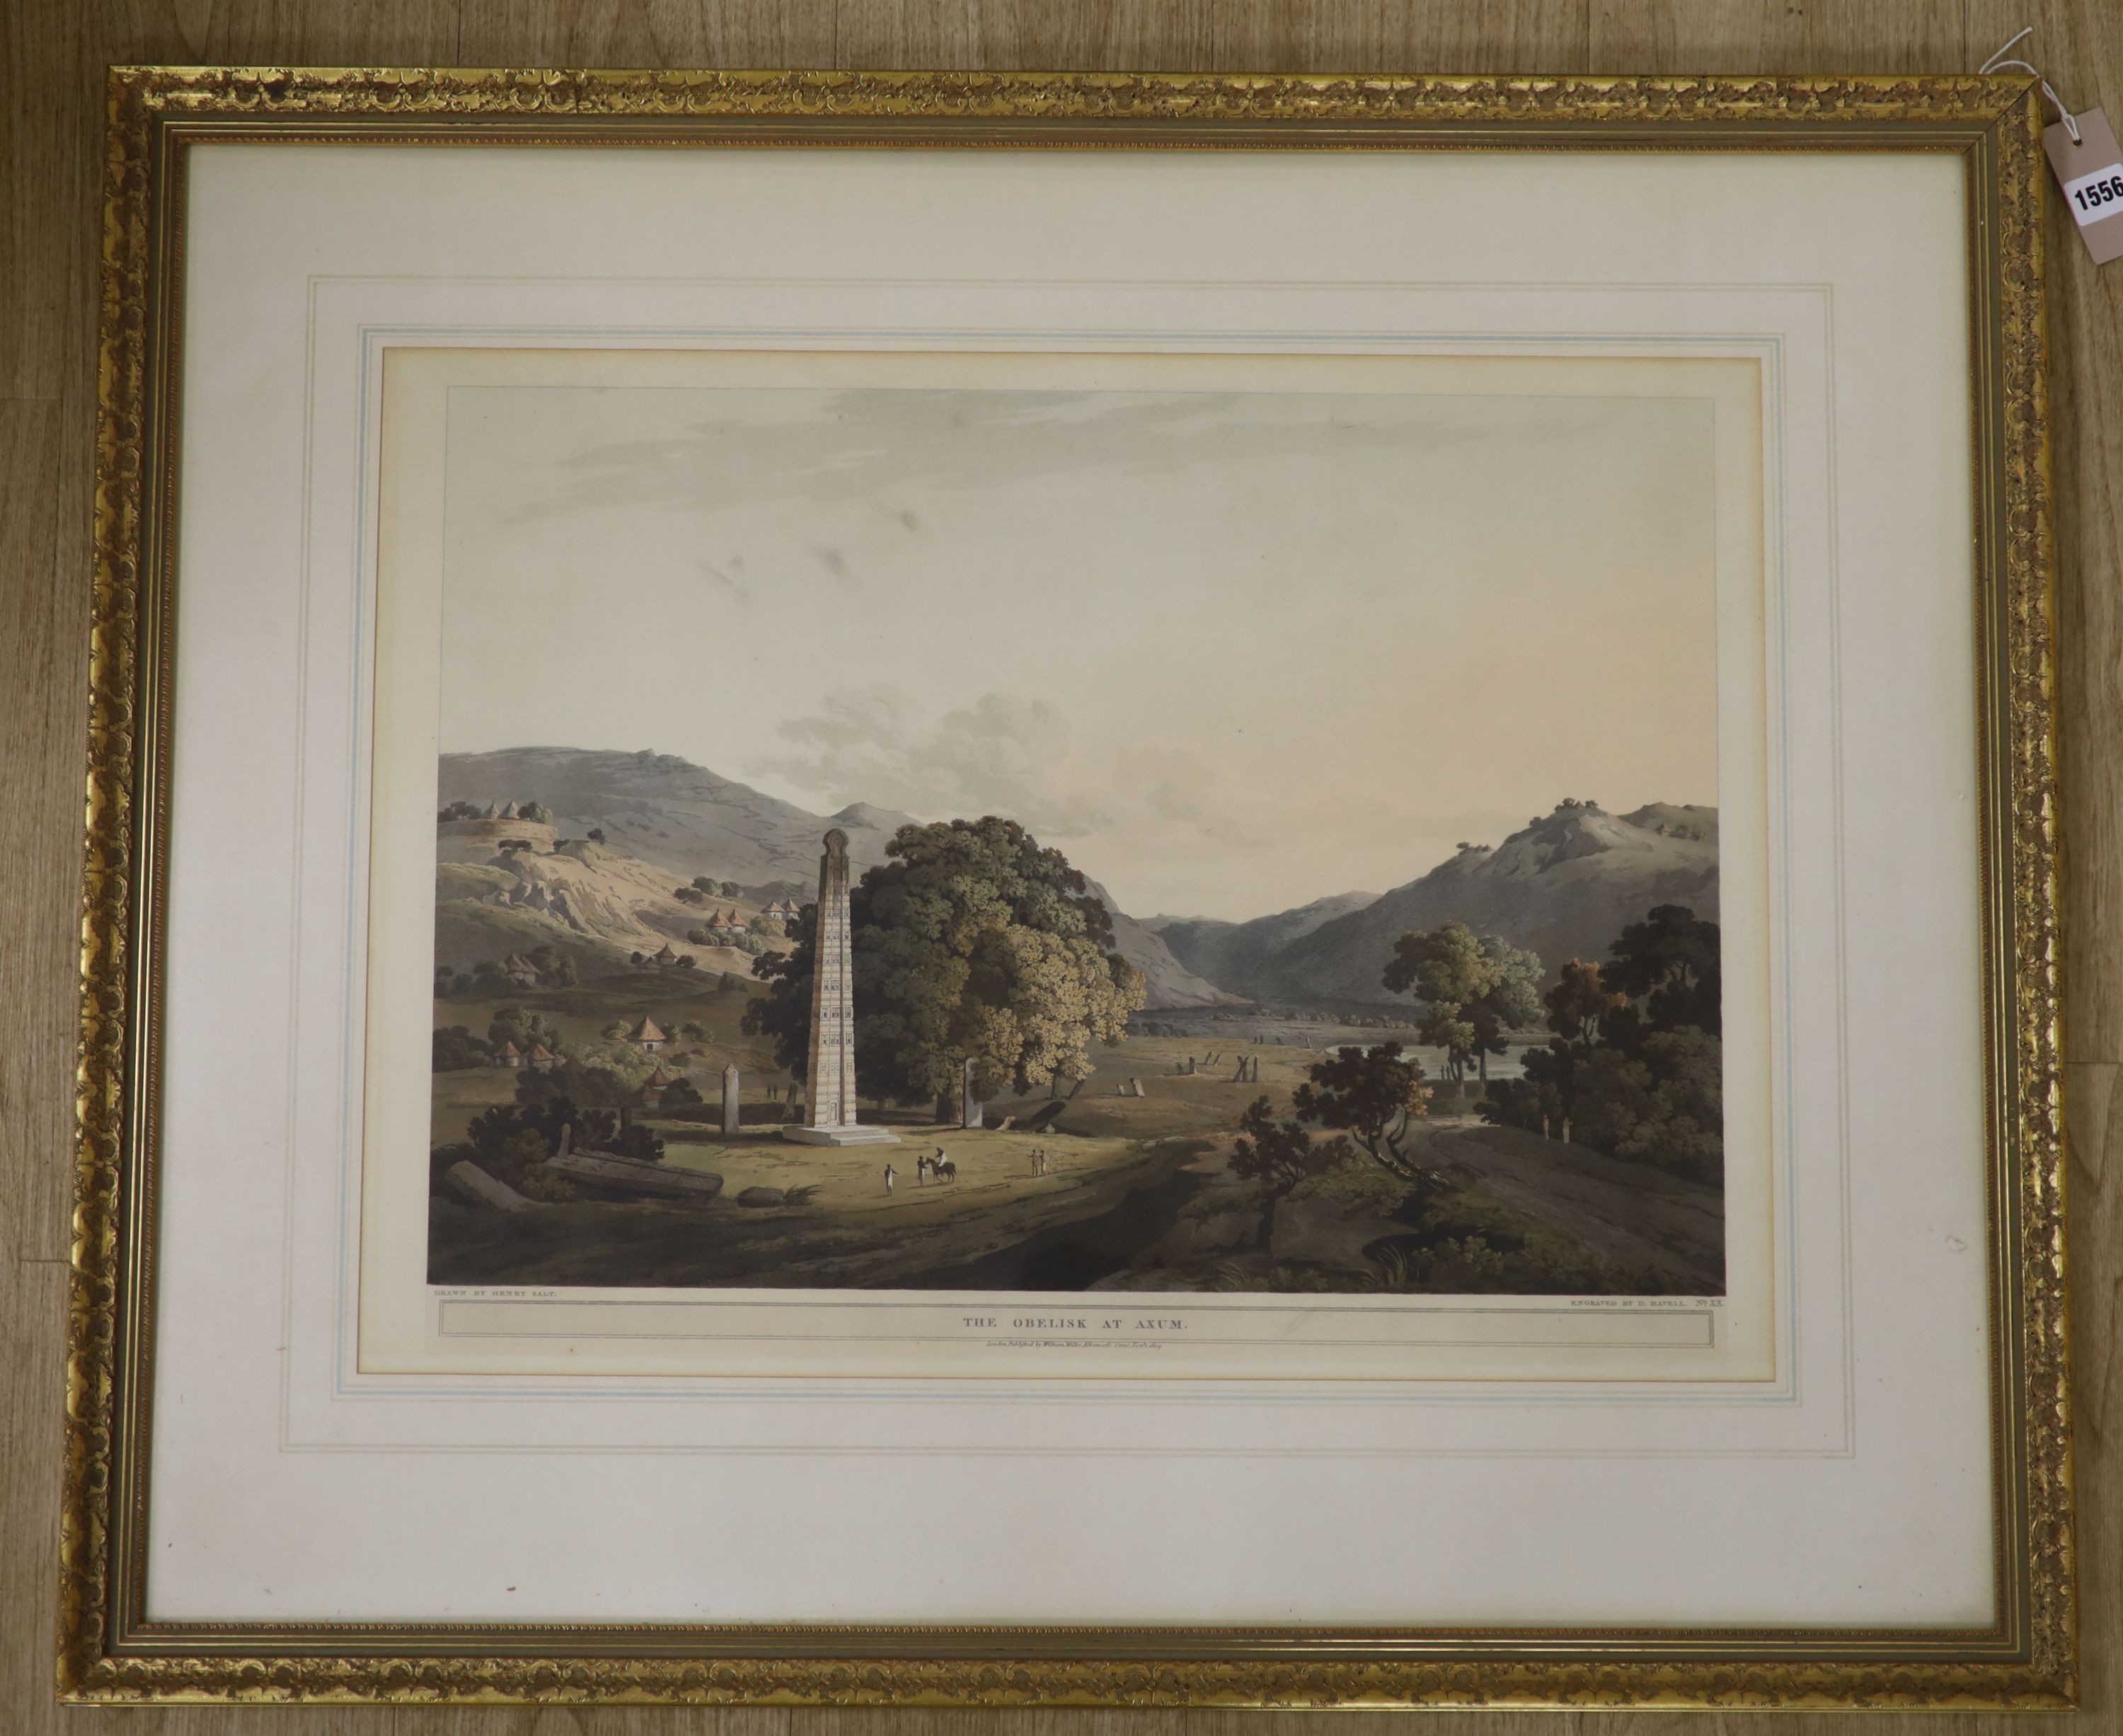 Havell after Henry Salt, coloured aquatint, 'The Obelisk at Axum' 1809, 42 x 59cm